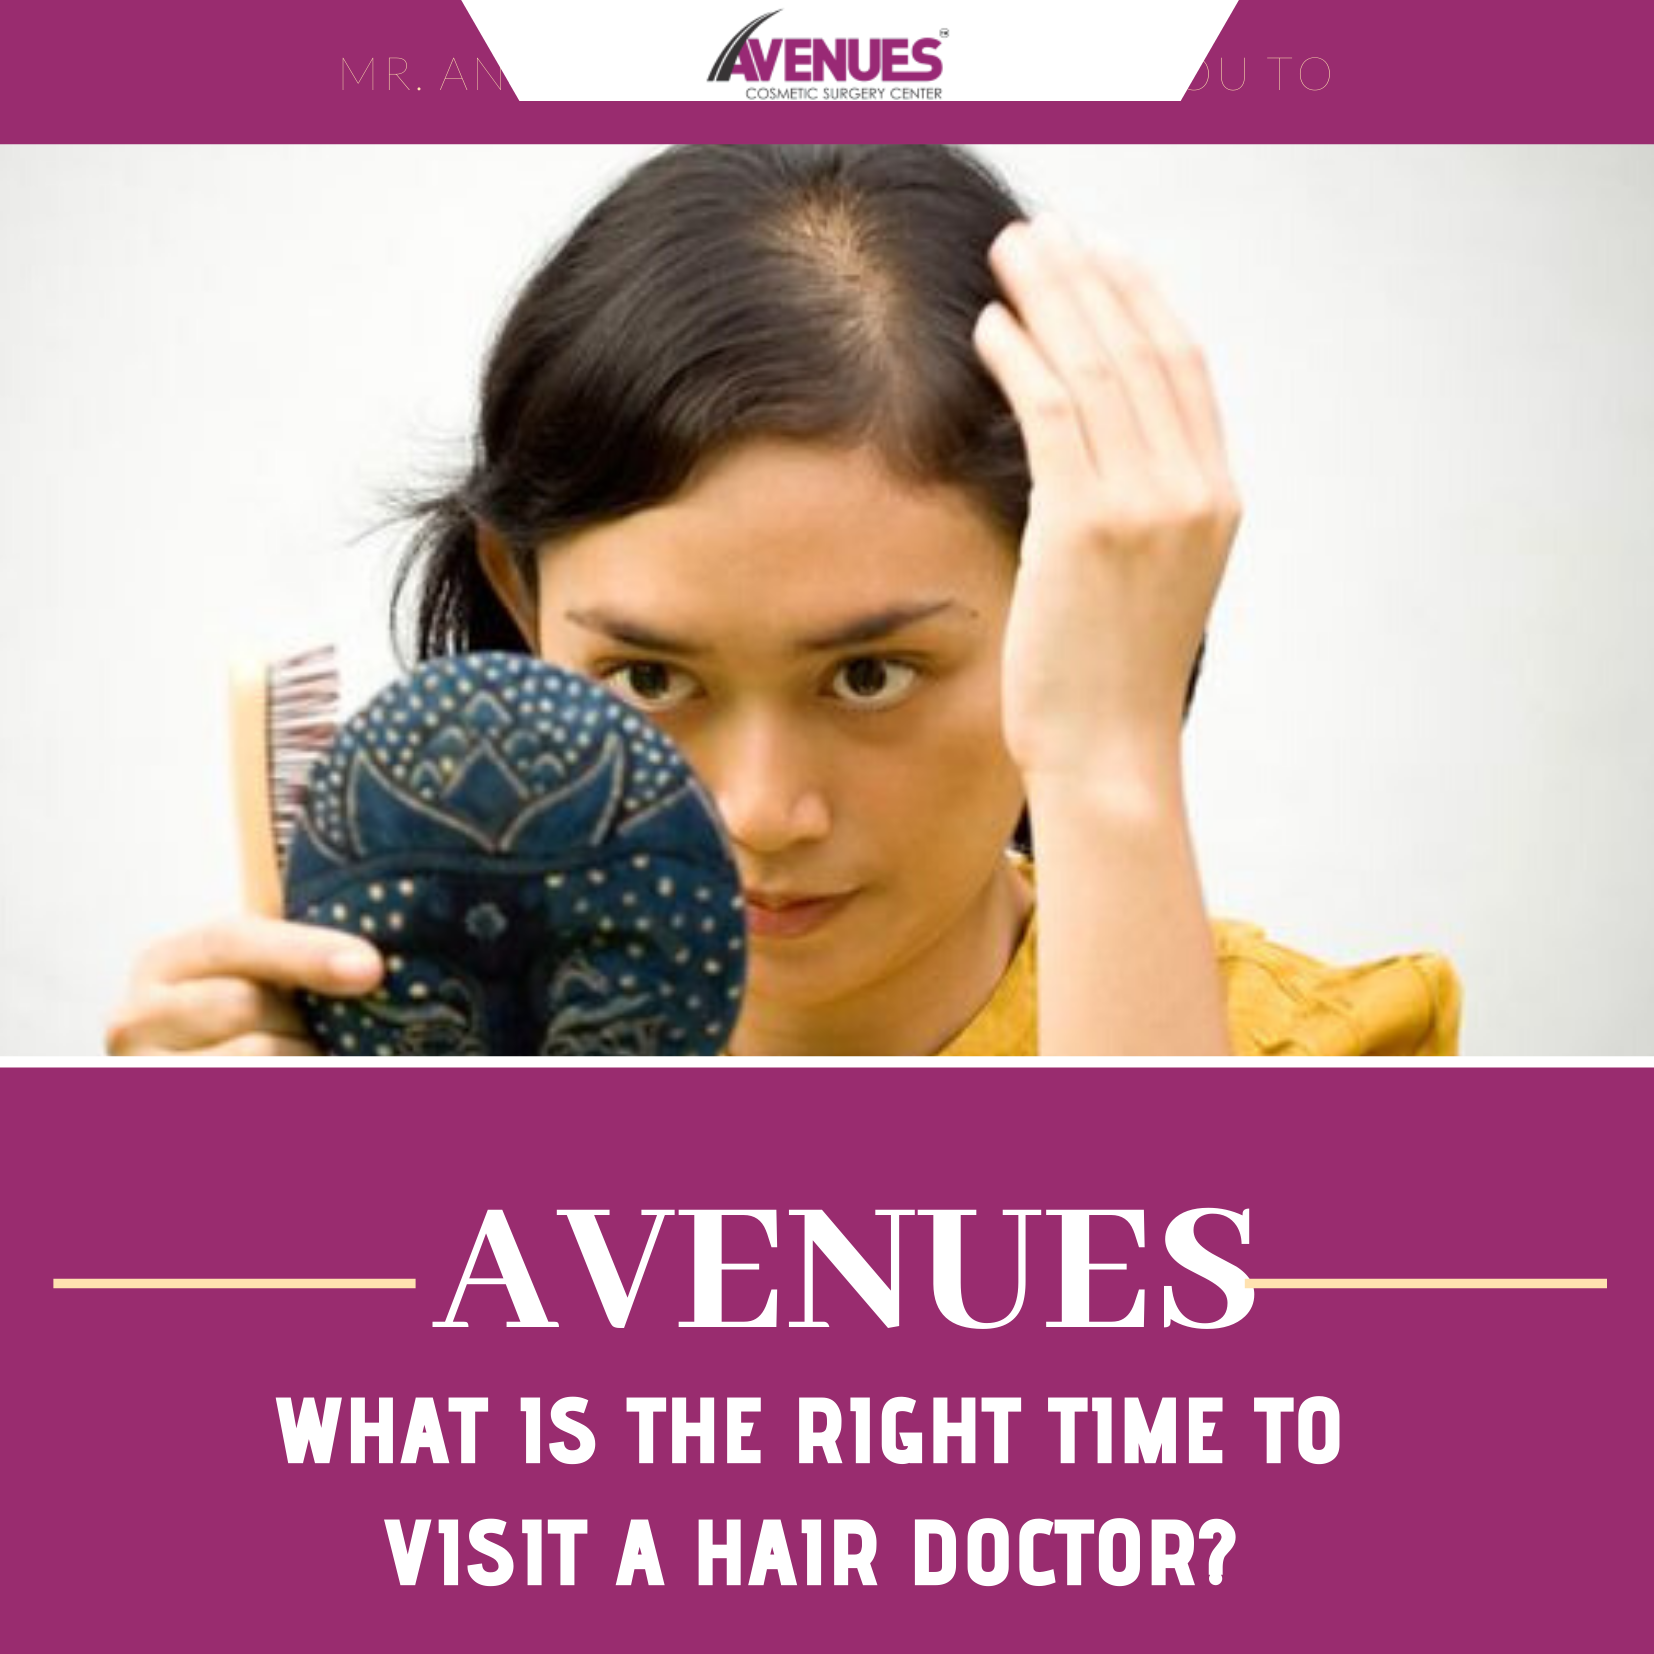 What Is The Right Time To Visit A Hair Doctor?